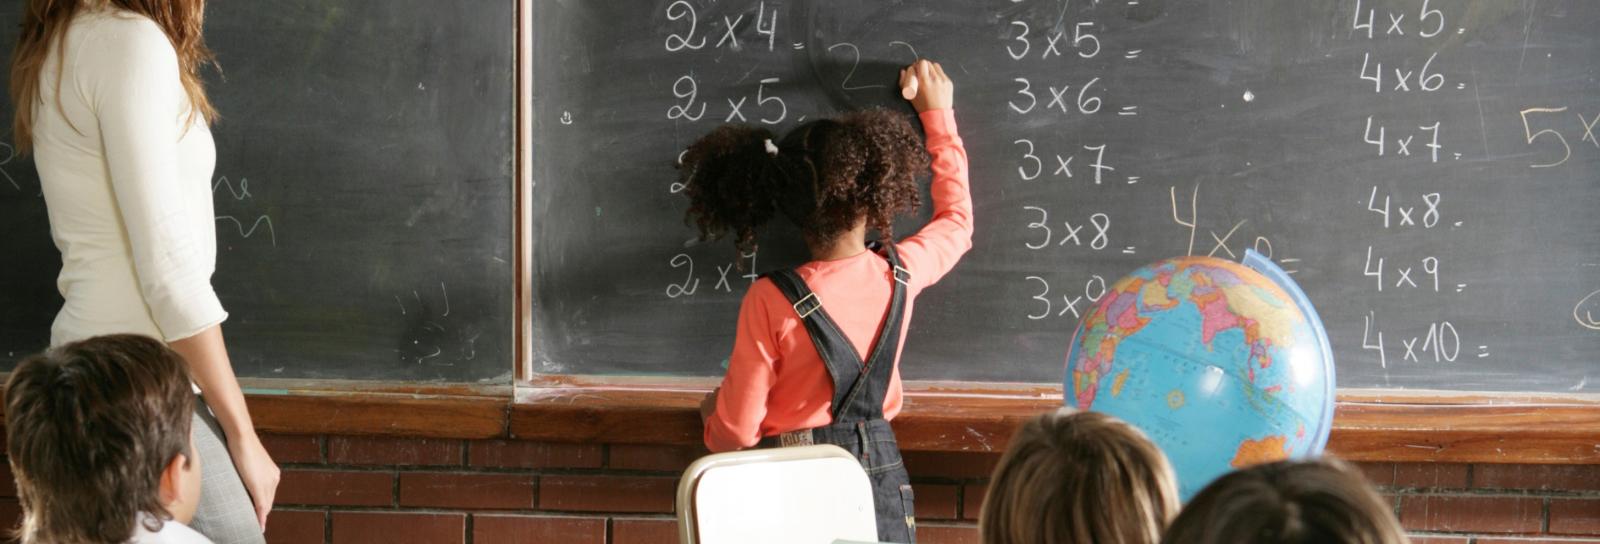 a young girl solves simple math problems on the black board while teacher and classmates watch